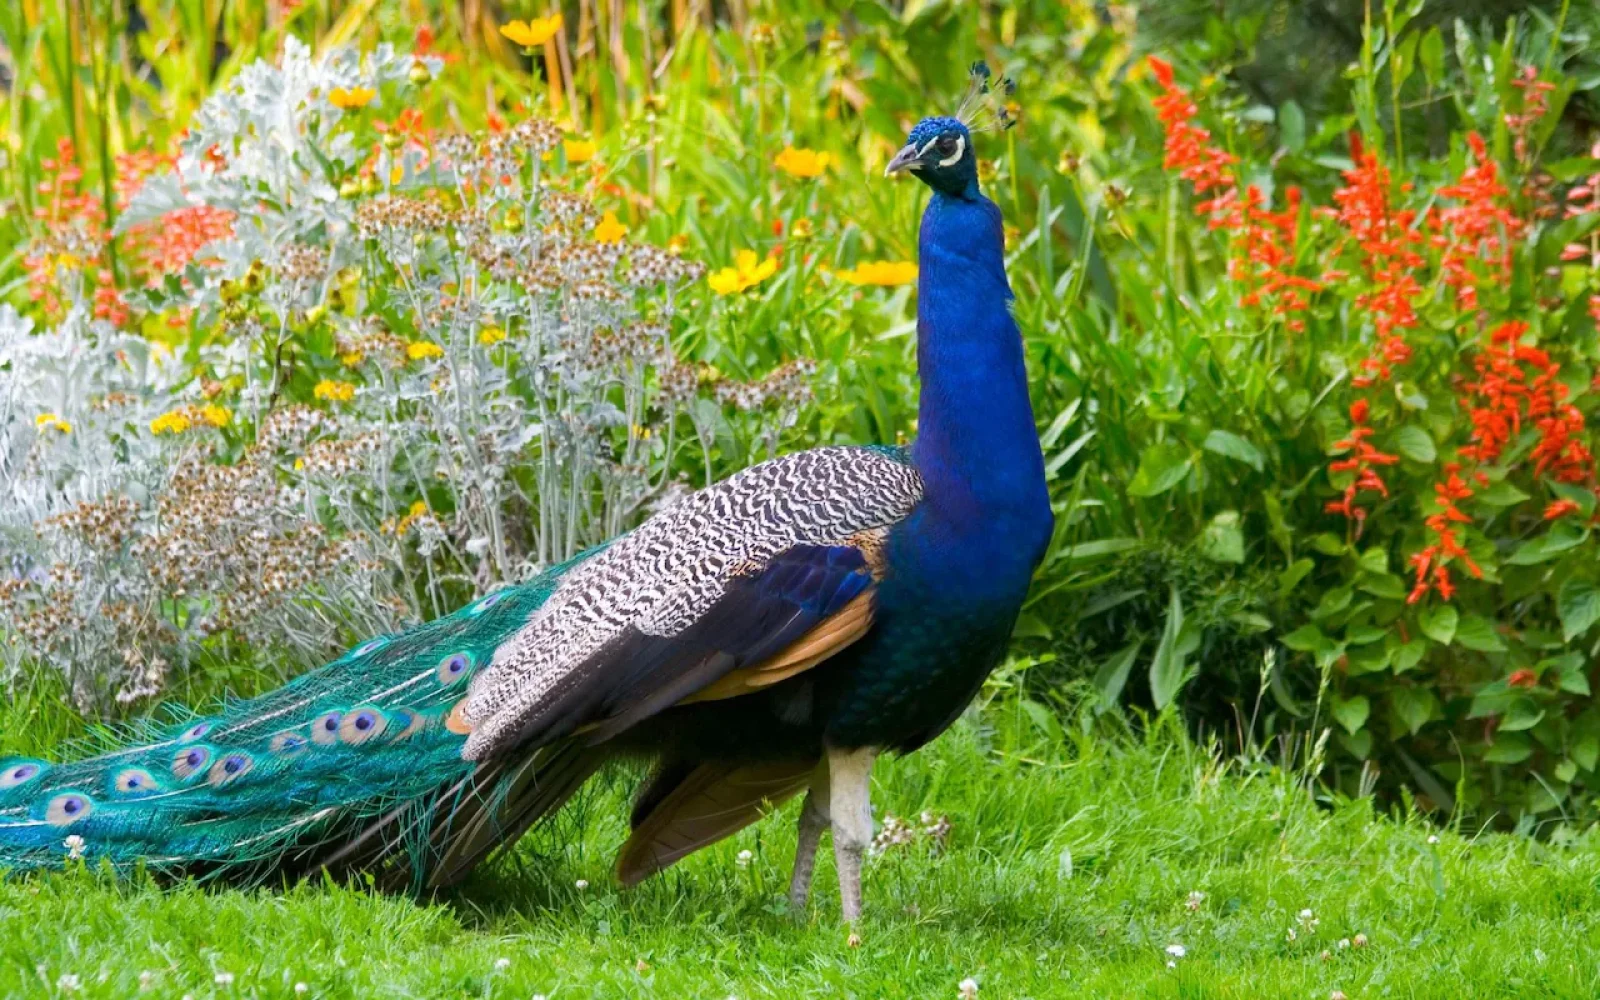 The new additions will join the 40 peacocks already housed on the McAlpine estate, along with a menagerie of other rescued wildlife kept by Lady McAlpine including lemurs, capybaras, wallabies and llamas. The Telegraph